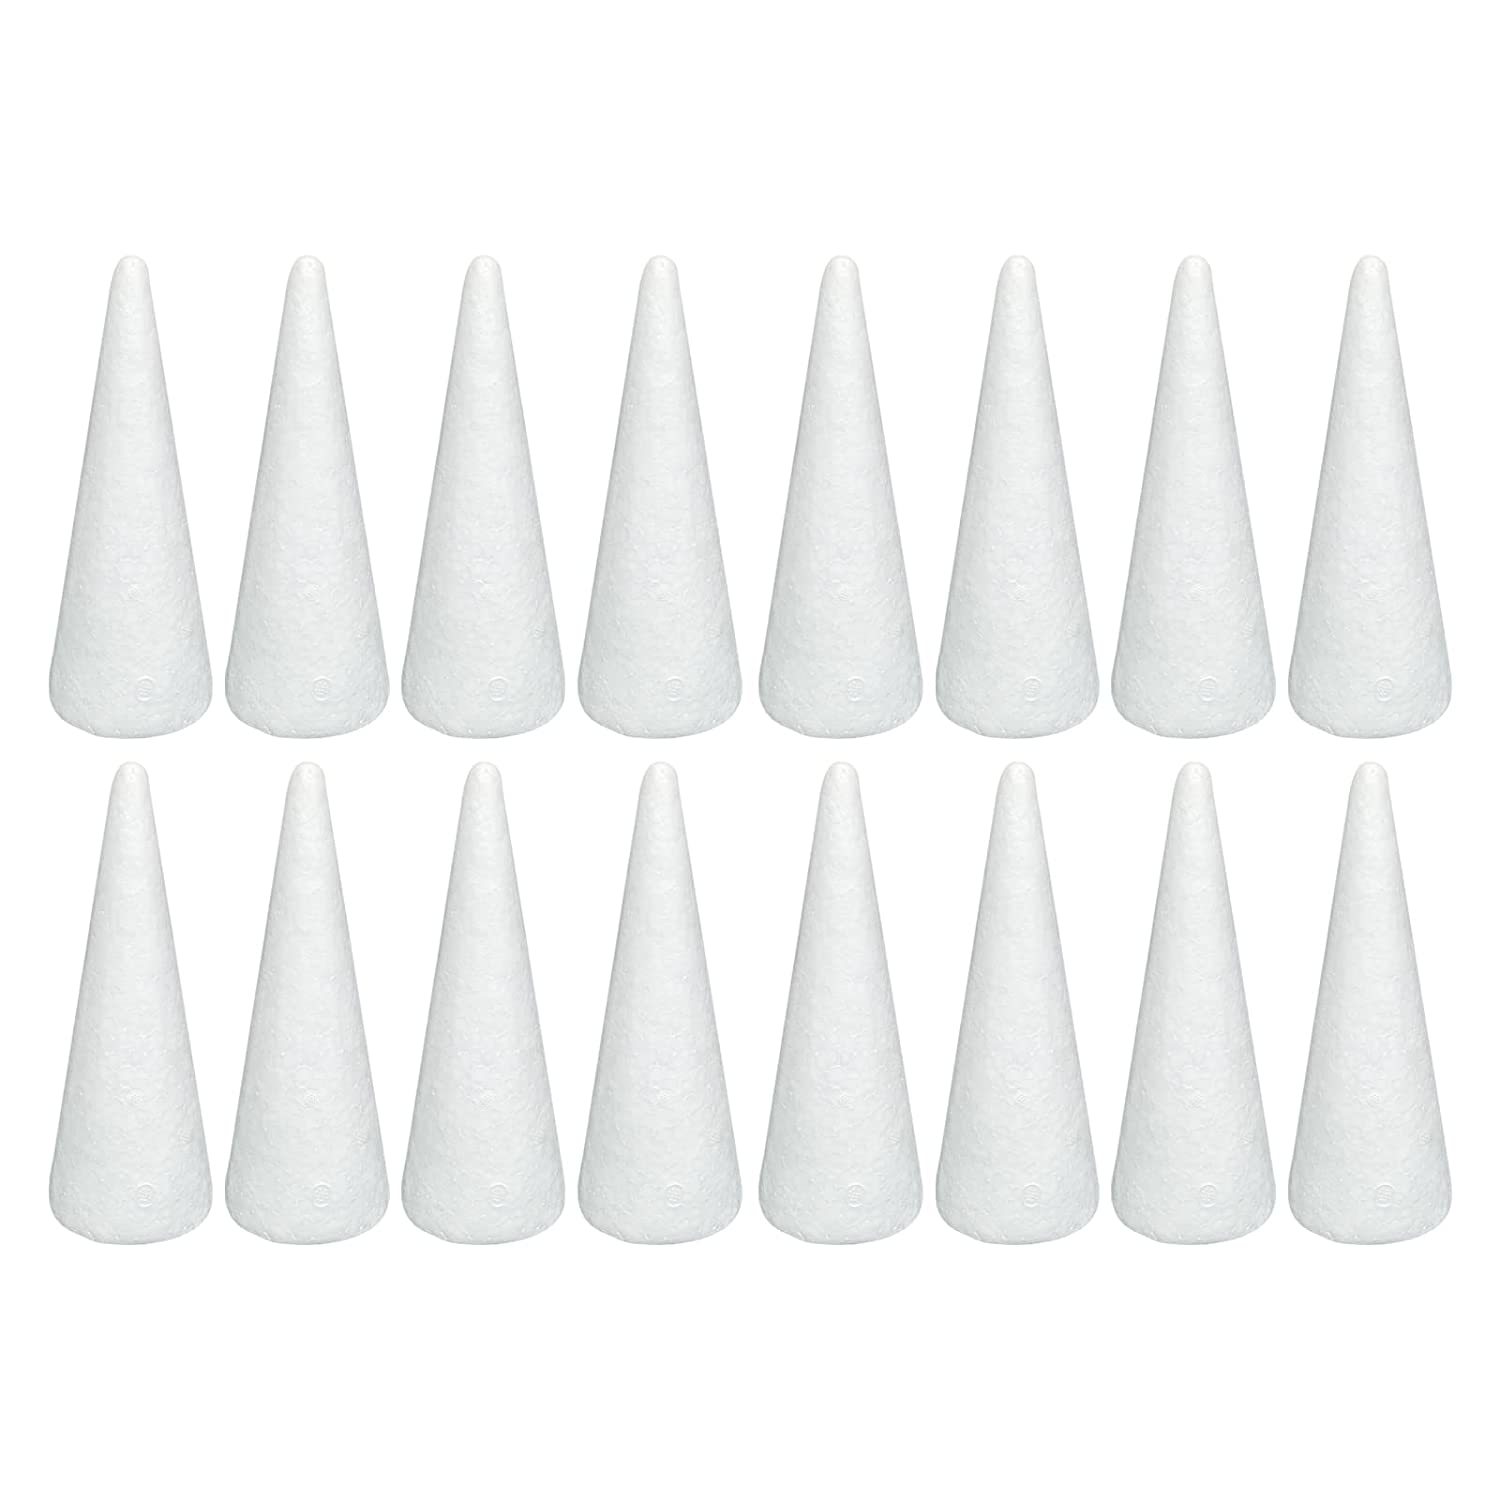 Foam Cones for DIY Arts and Crafts (2.76 x 7.2in, 16 Pack), White Styrofoam Poly